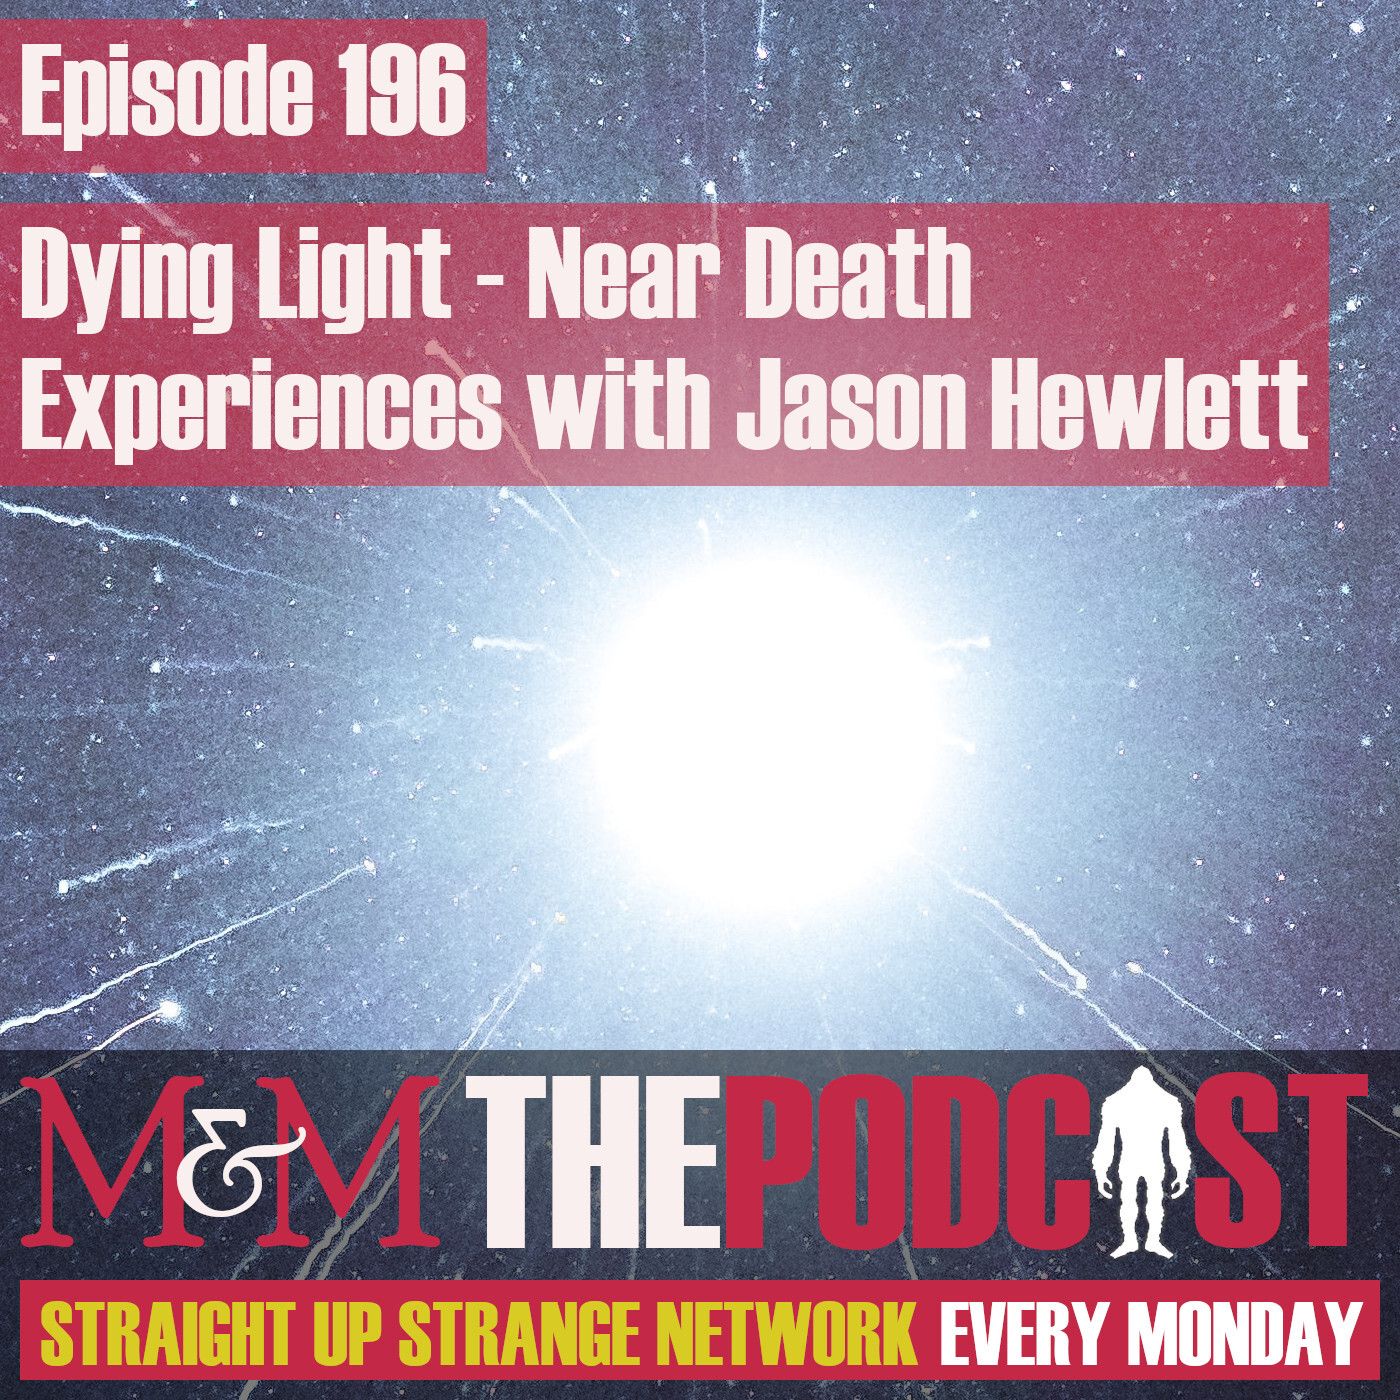 Mysteries and Monsters: Episode 196 Dying Light: Near Death Experiences with Jason Hewlett